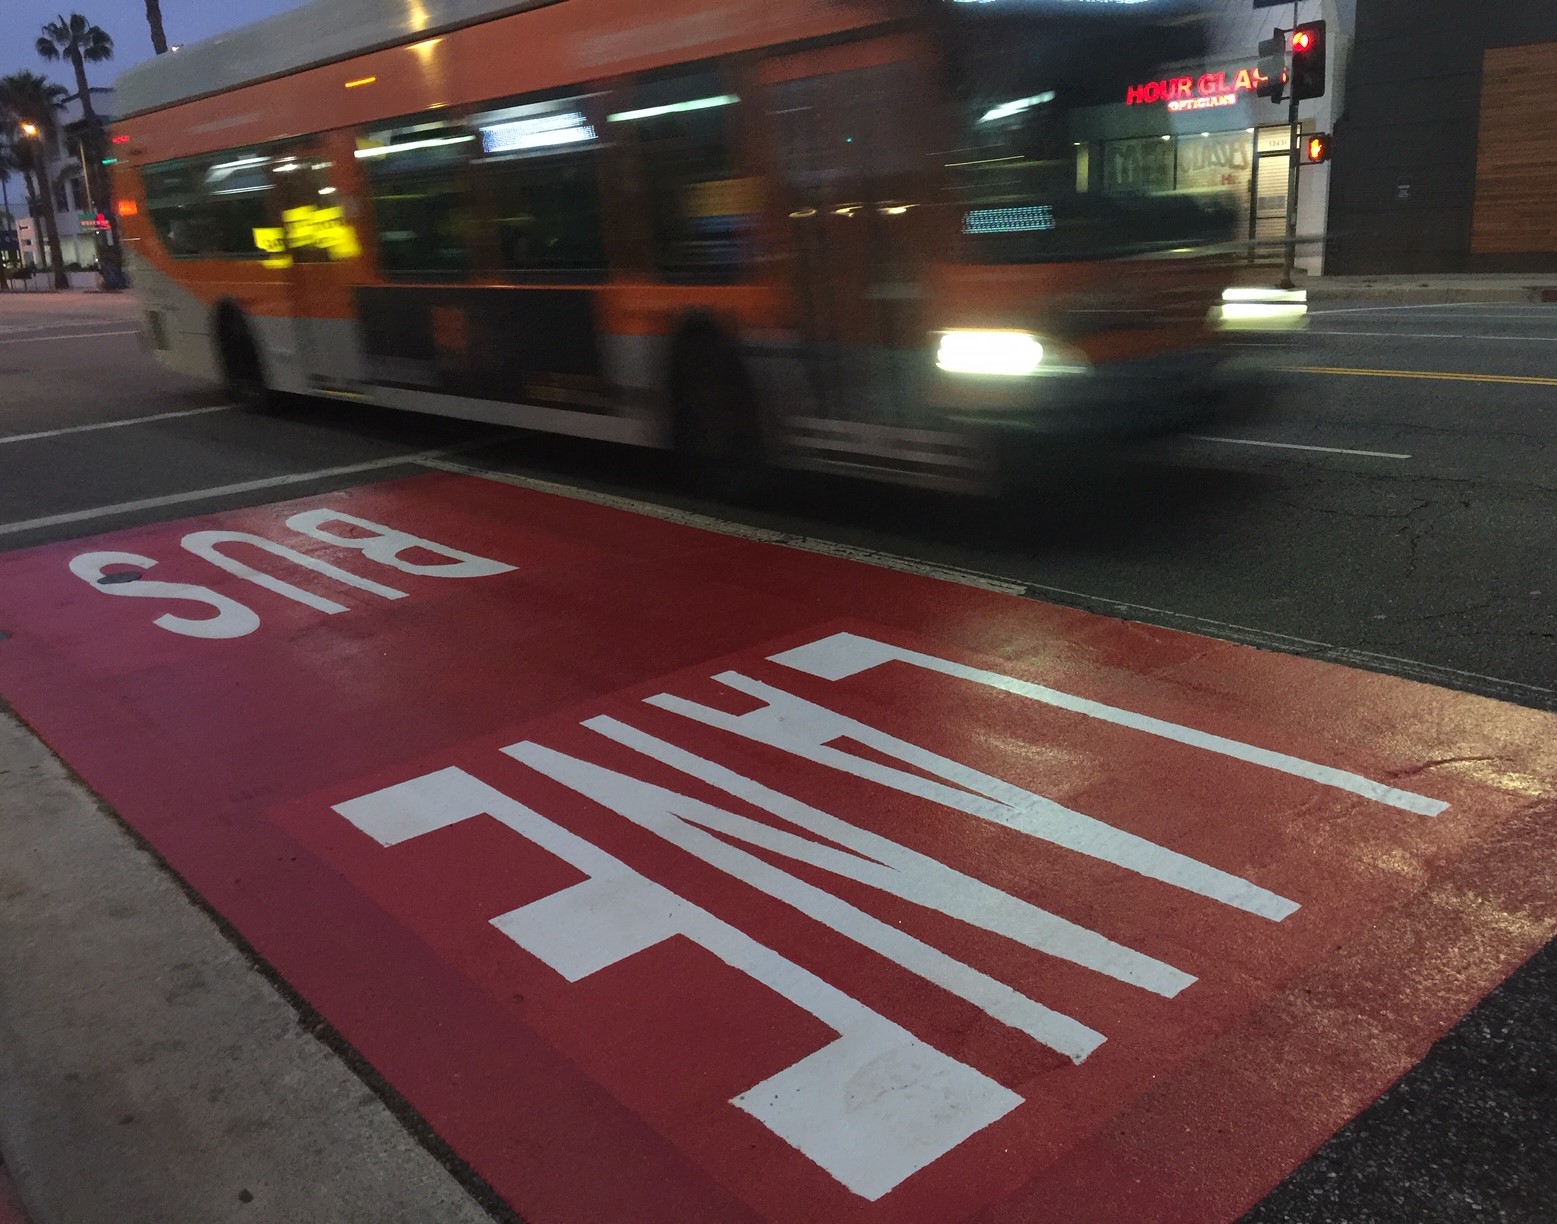 LA: Automated Enforcement Coming Soon to a Bus Lane Near You